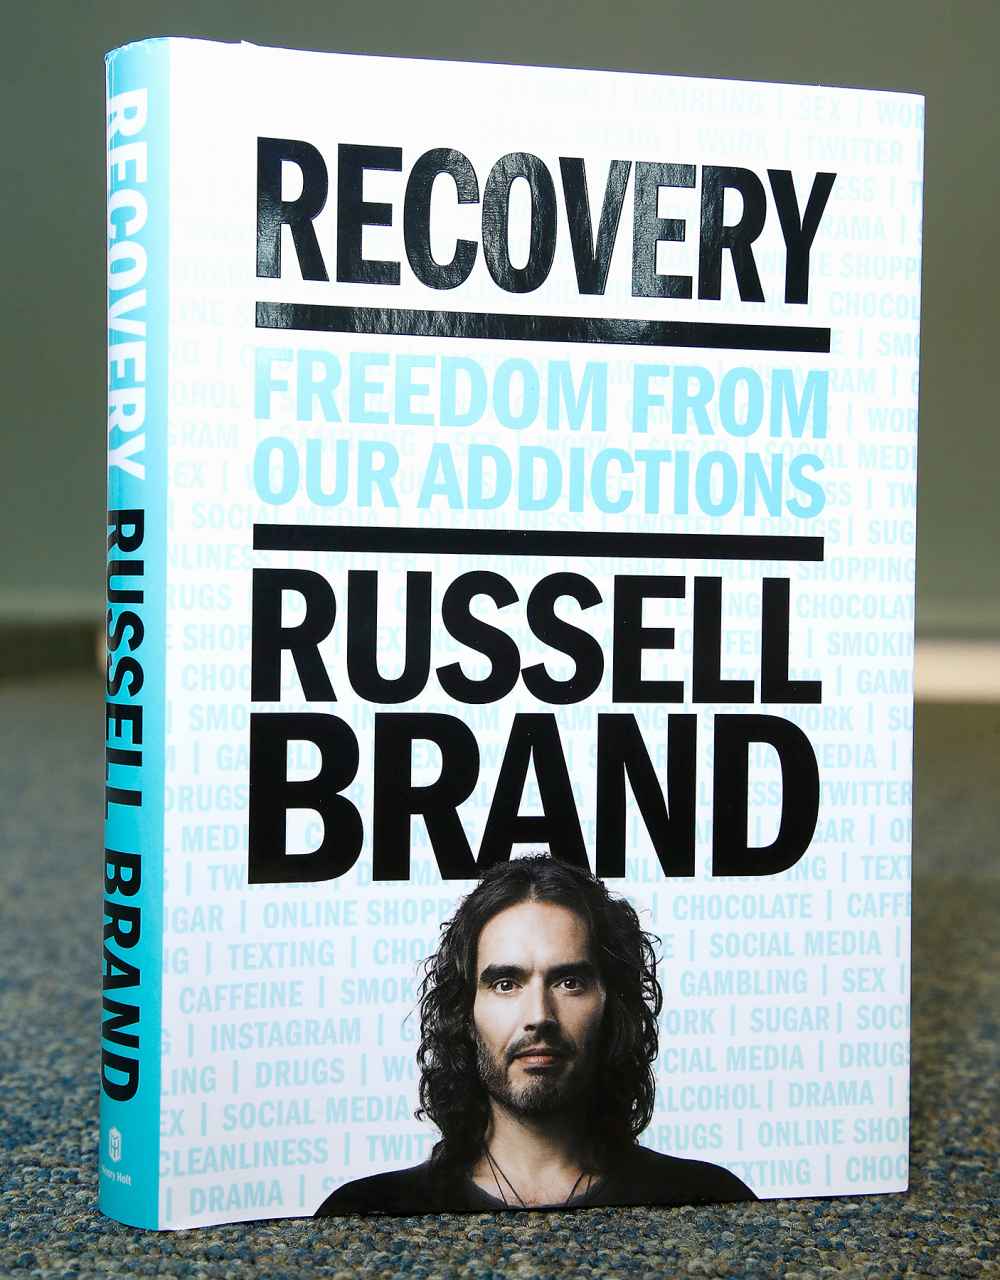 Russell Brand Recovery: Freedom From Our Addictions